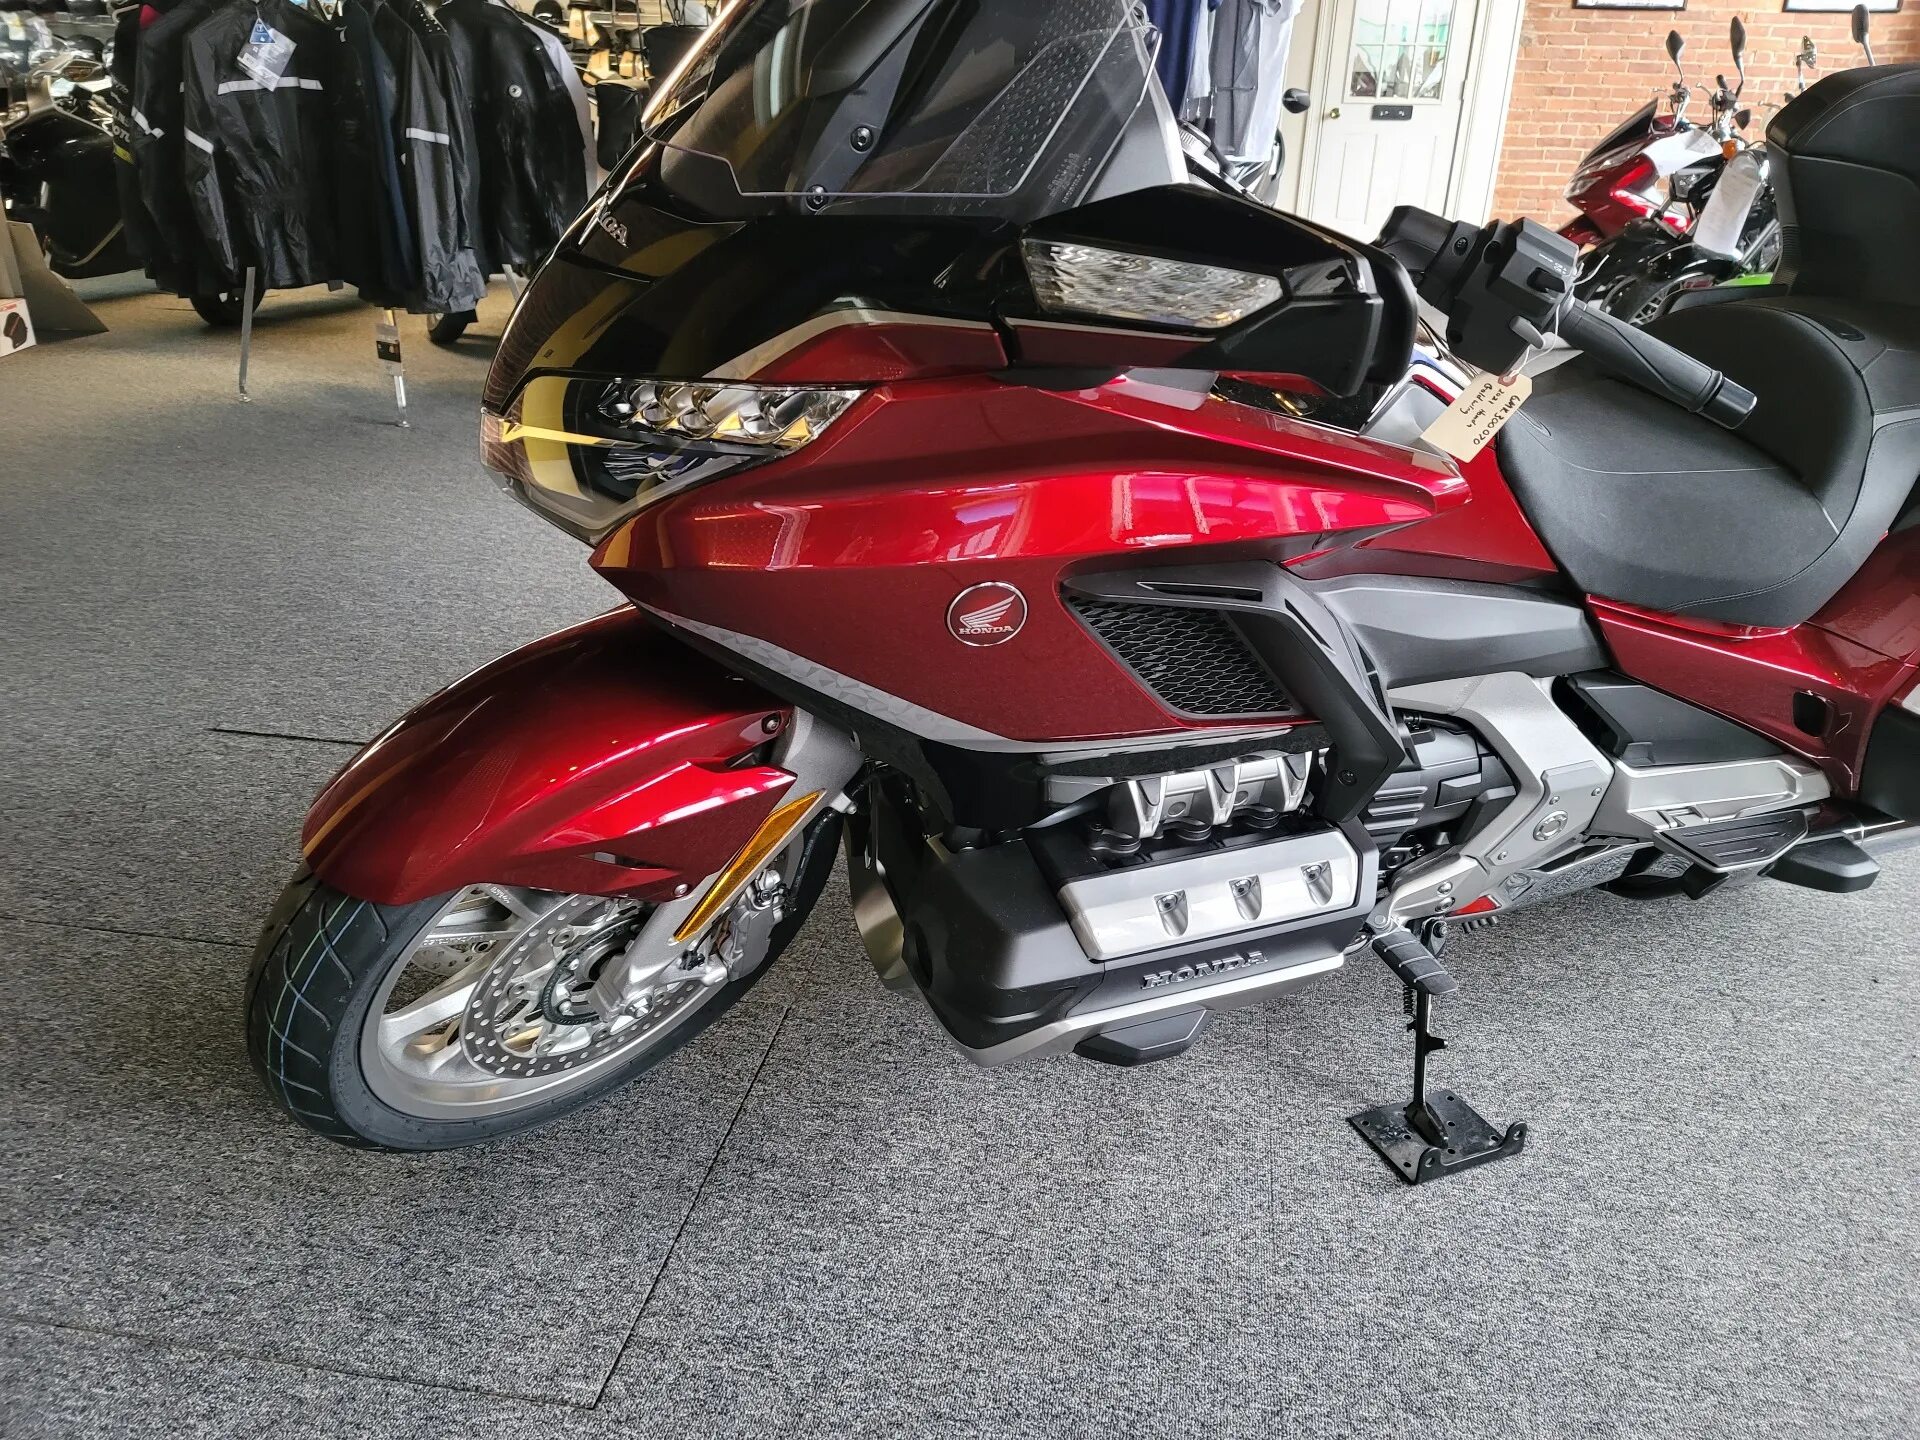 Honda Gold Wing Tour 2021. Gold Wing мотоцикл 2021. Honda Gold Wing Tour 2021 Tuning. 2023 Honda Gold Wing Tour Automatic DCT.